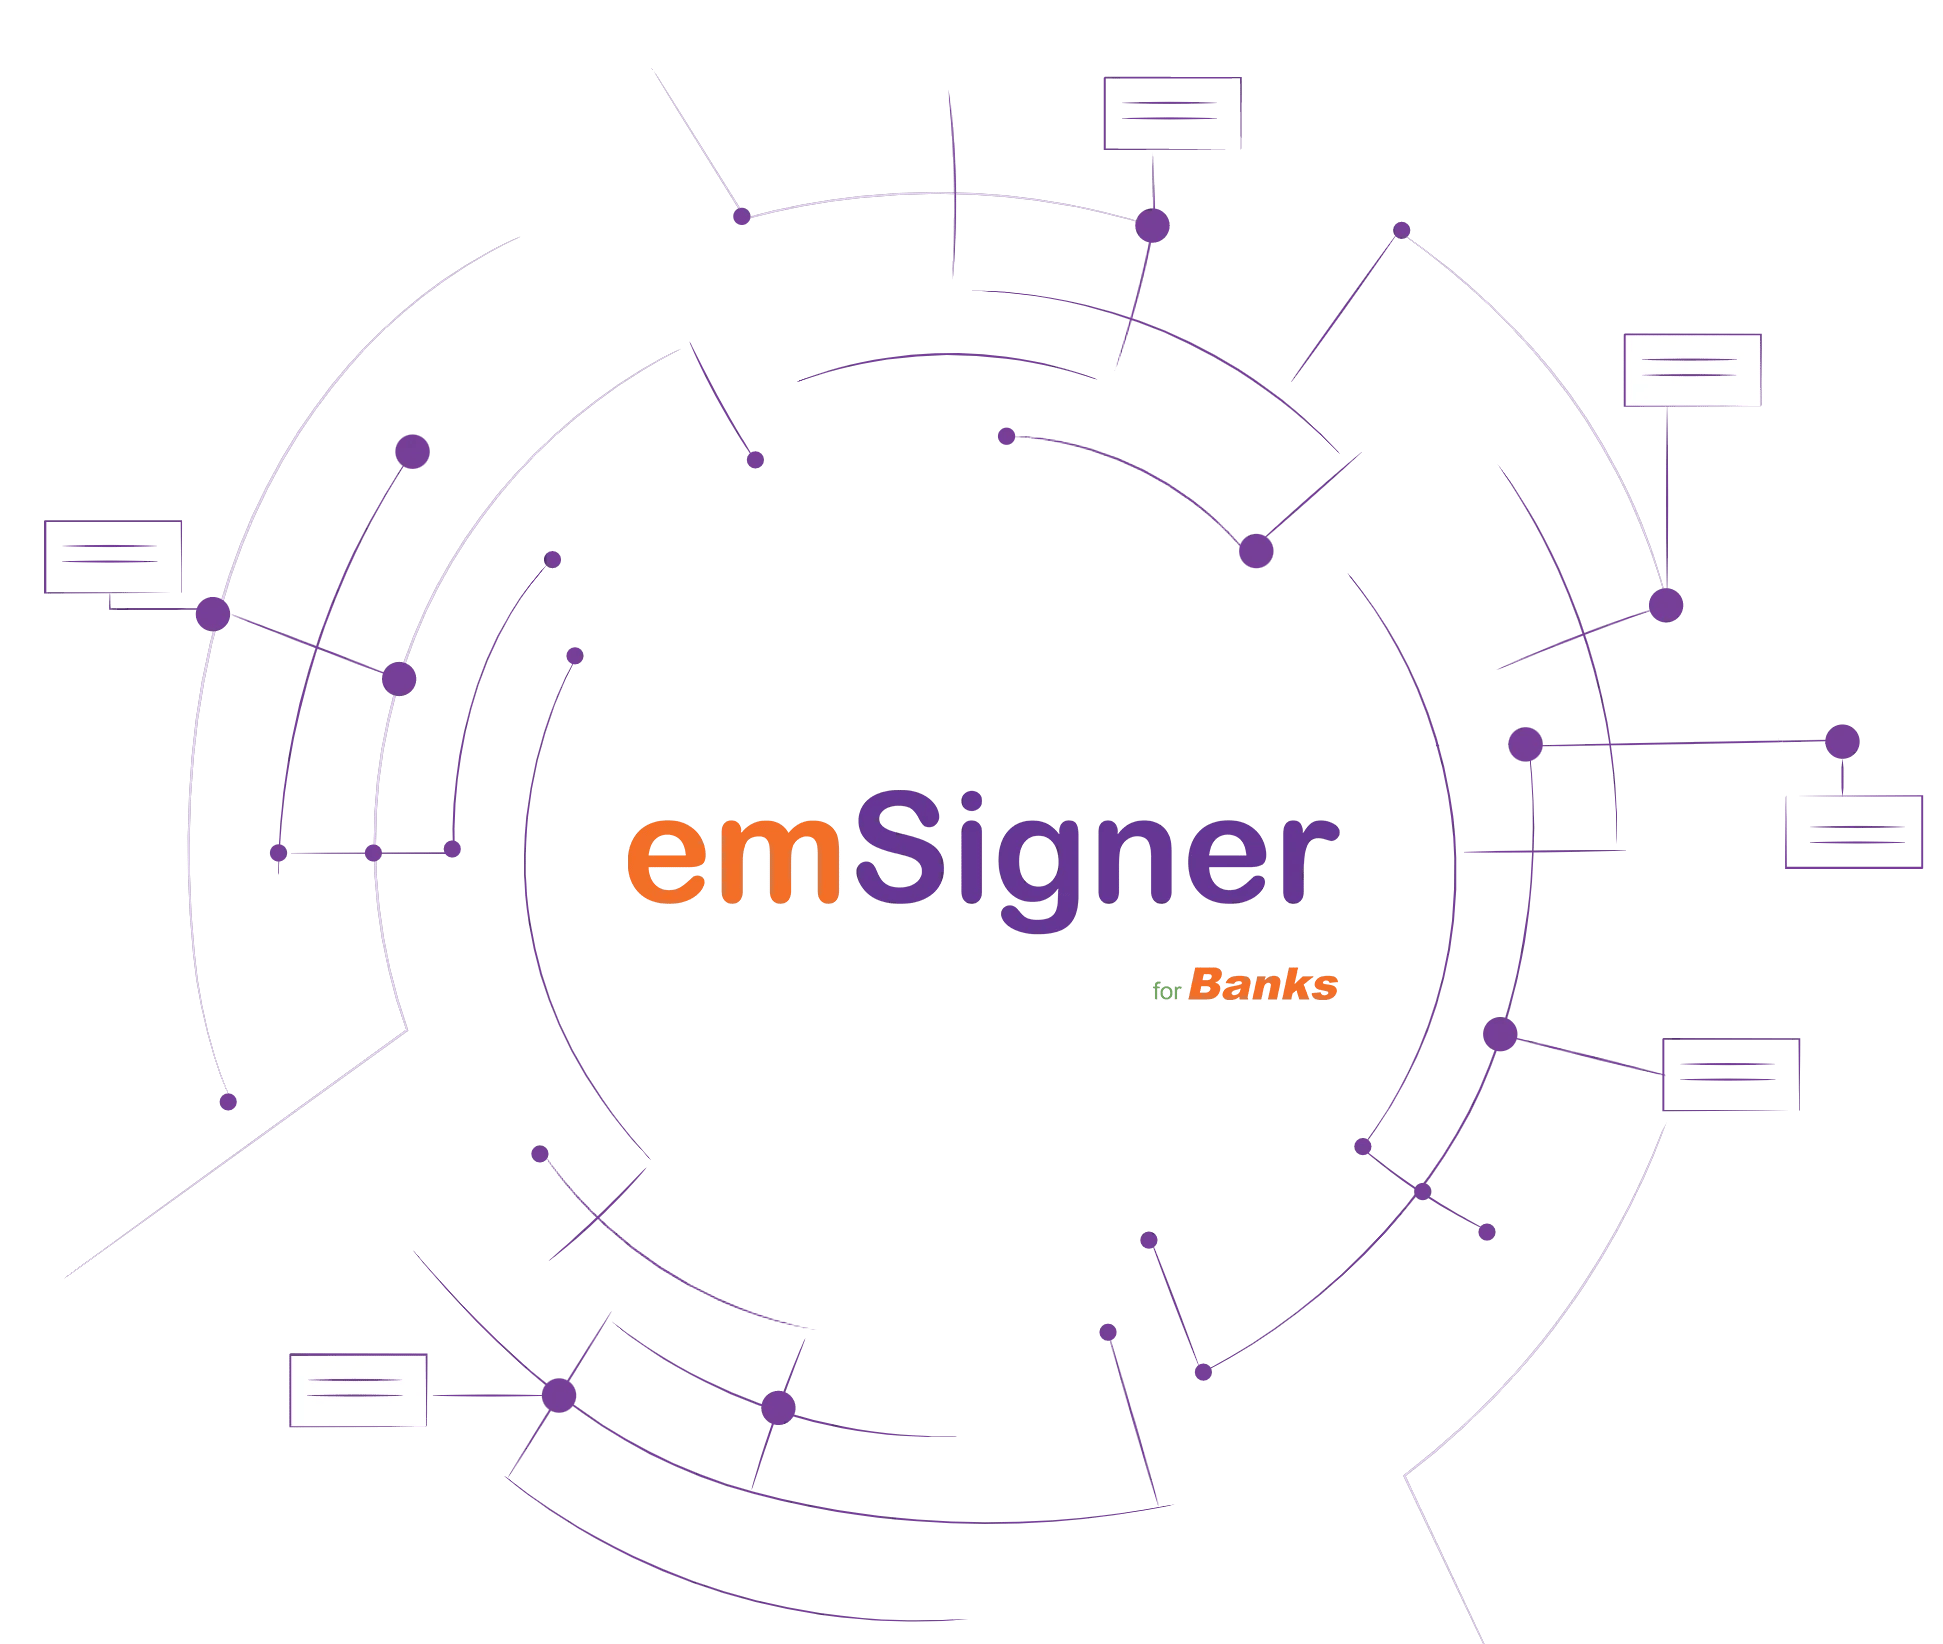 emSigner for banks - Functionalities that make a difference